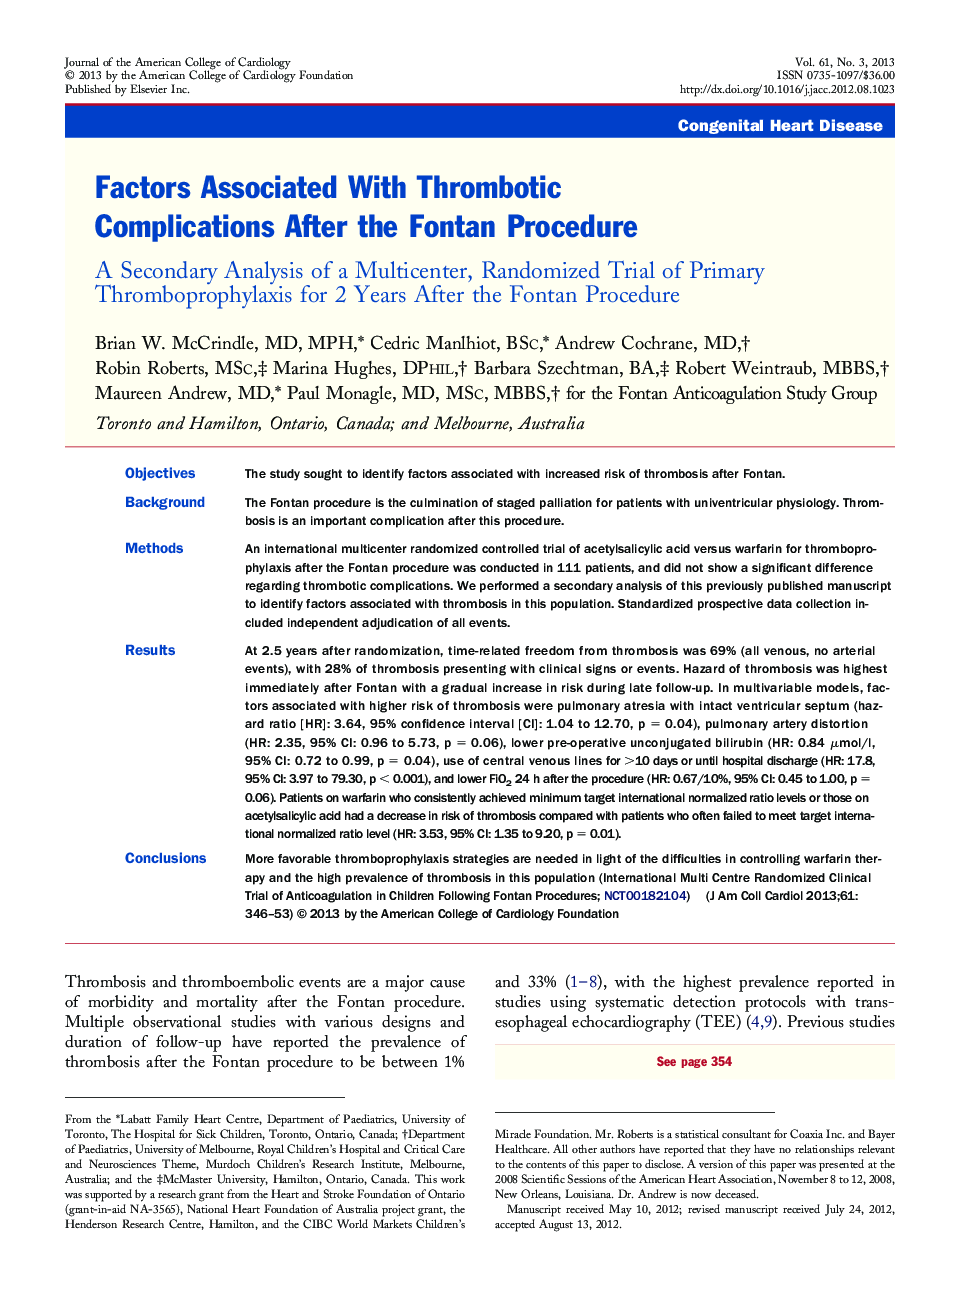 Factors Associated With Thrombotic Complications After the Fontan Procedure : A Secondary Analysis of a Multicenter, Randomized Trial of Primary Thromboprophylaxis for 2 Years After the Fontan Procedure